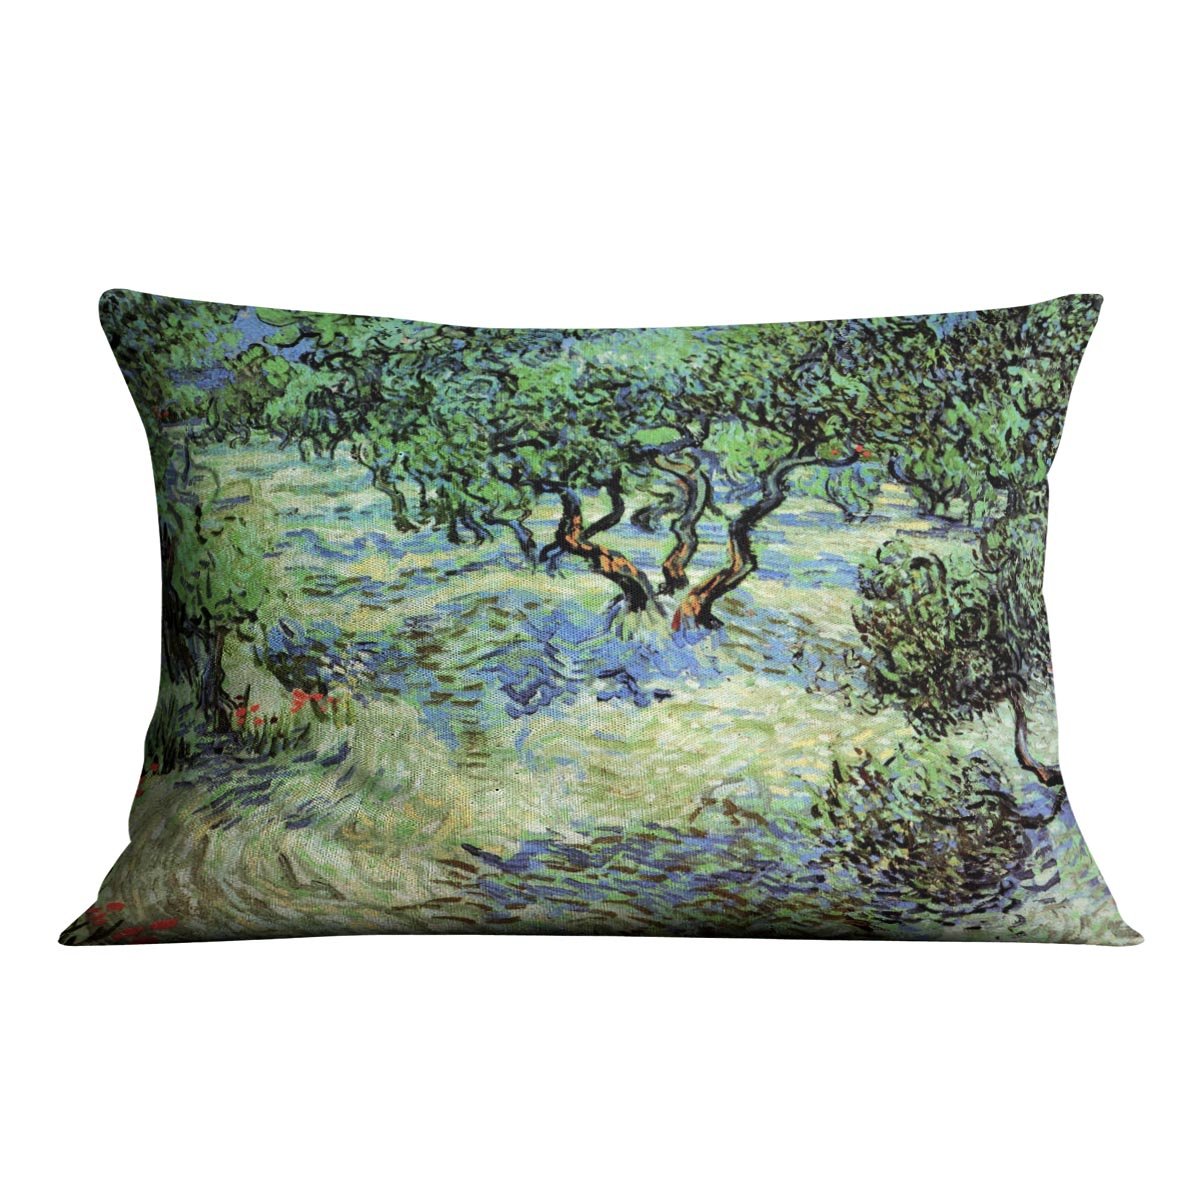 Olive Grove by Van Gogh Throw Pillow